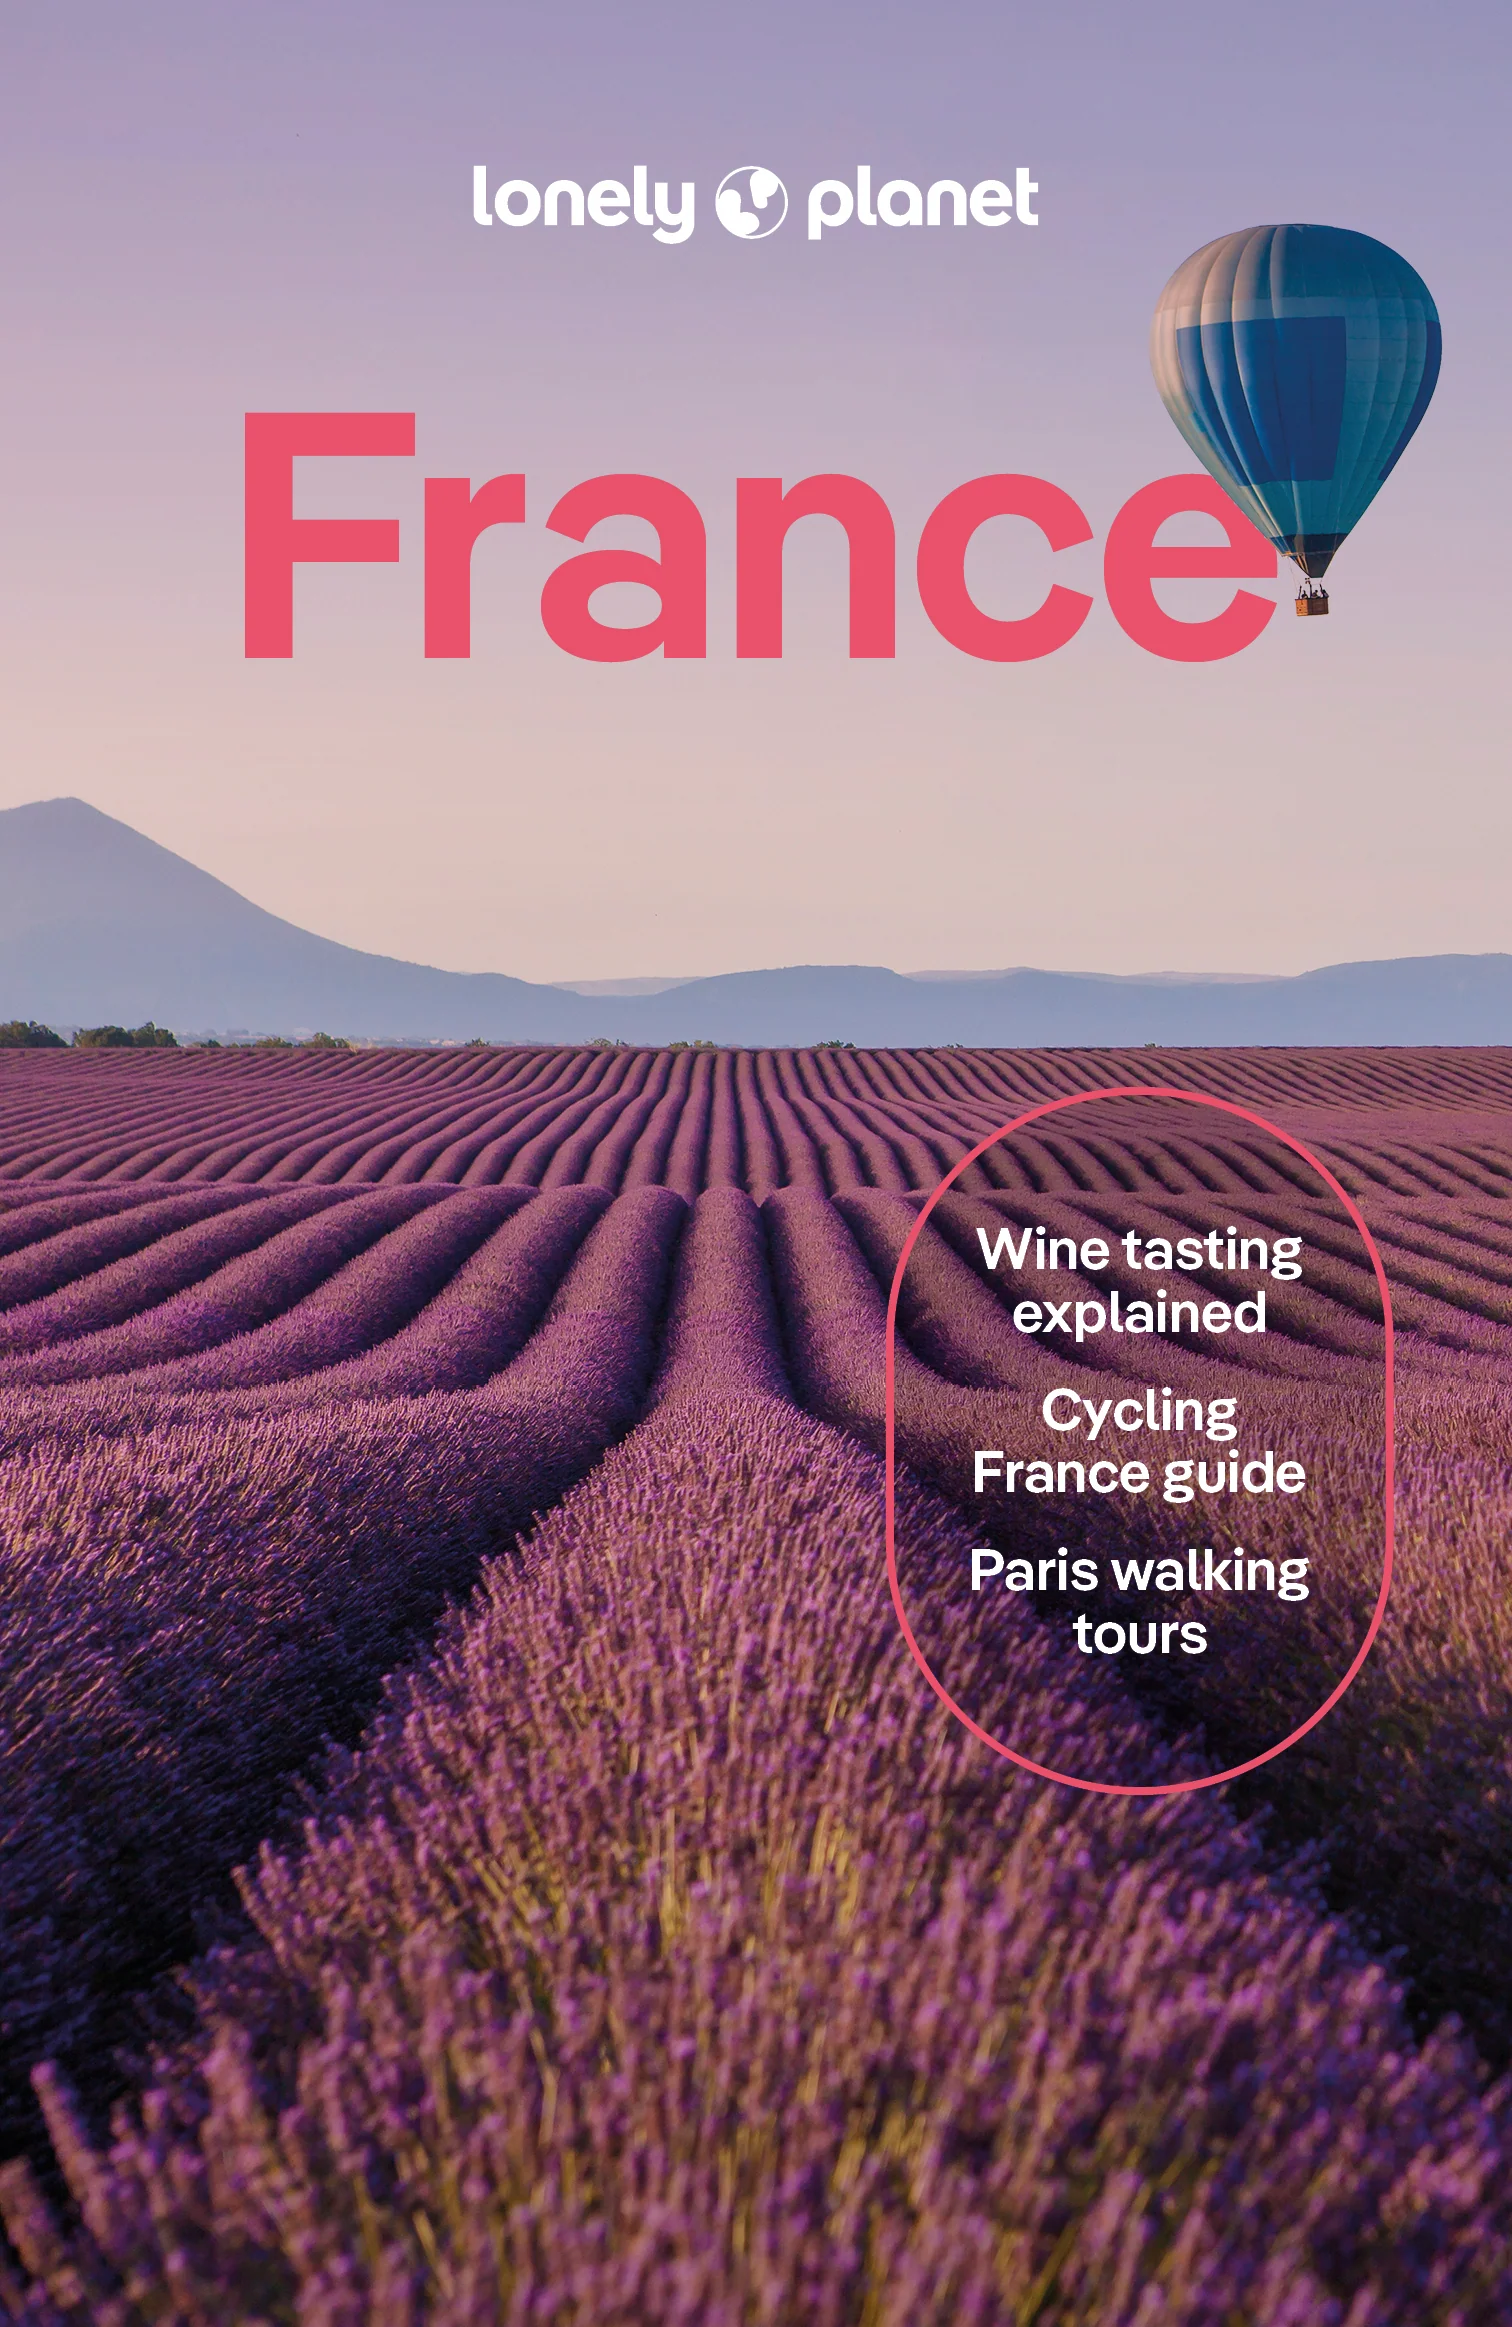 Franta ghid turistic Lonely Planet (engleză)